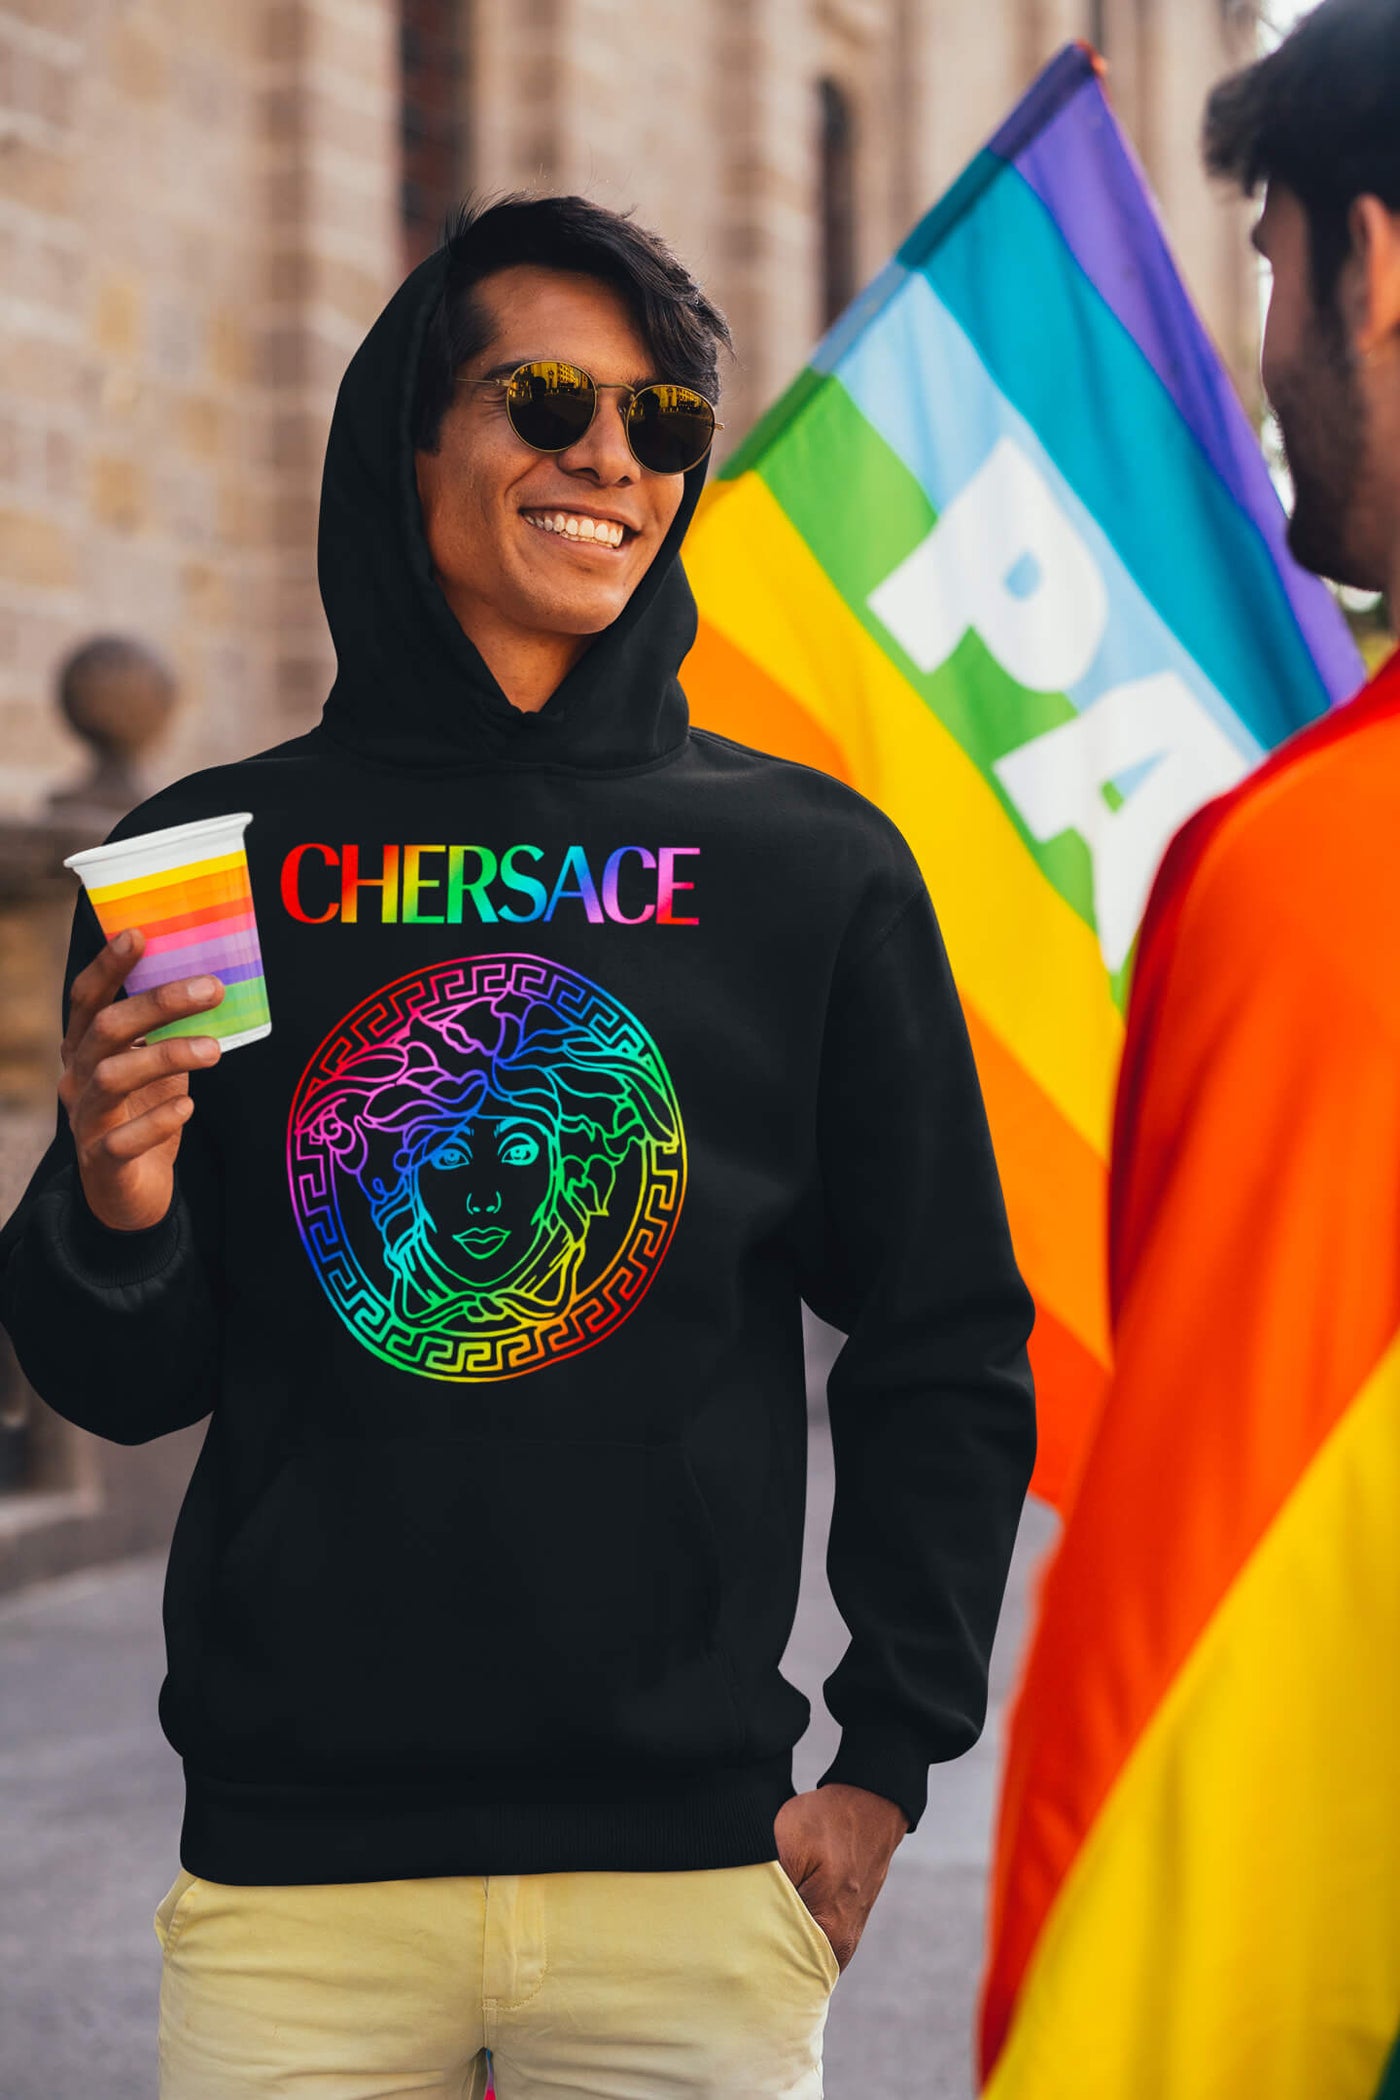 Man with a CHERSACE by Gllamazon hoodie and sunglasses at the Pride parade.